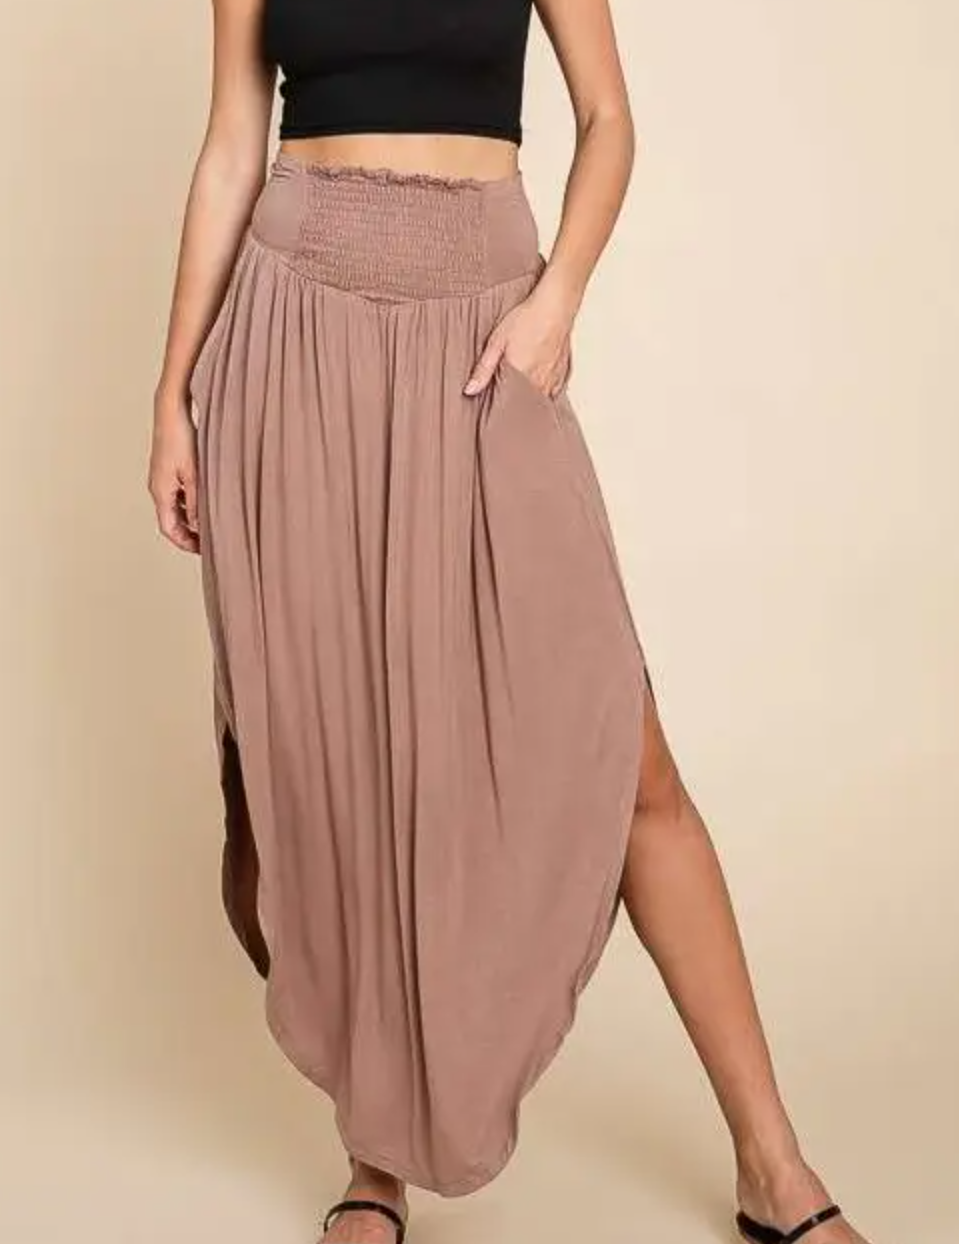 Be the Queen V-Shaped Maxi Skirt